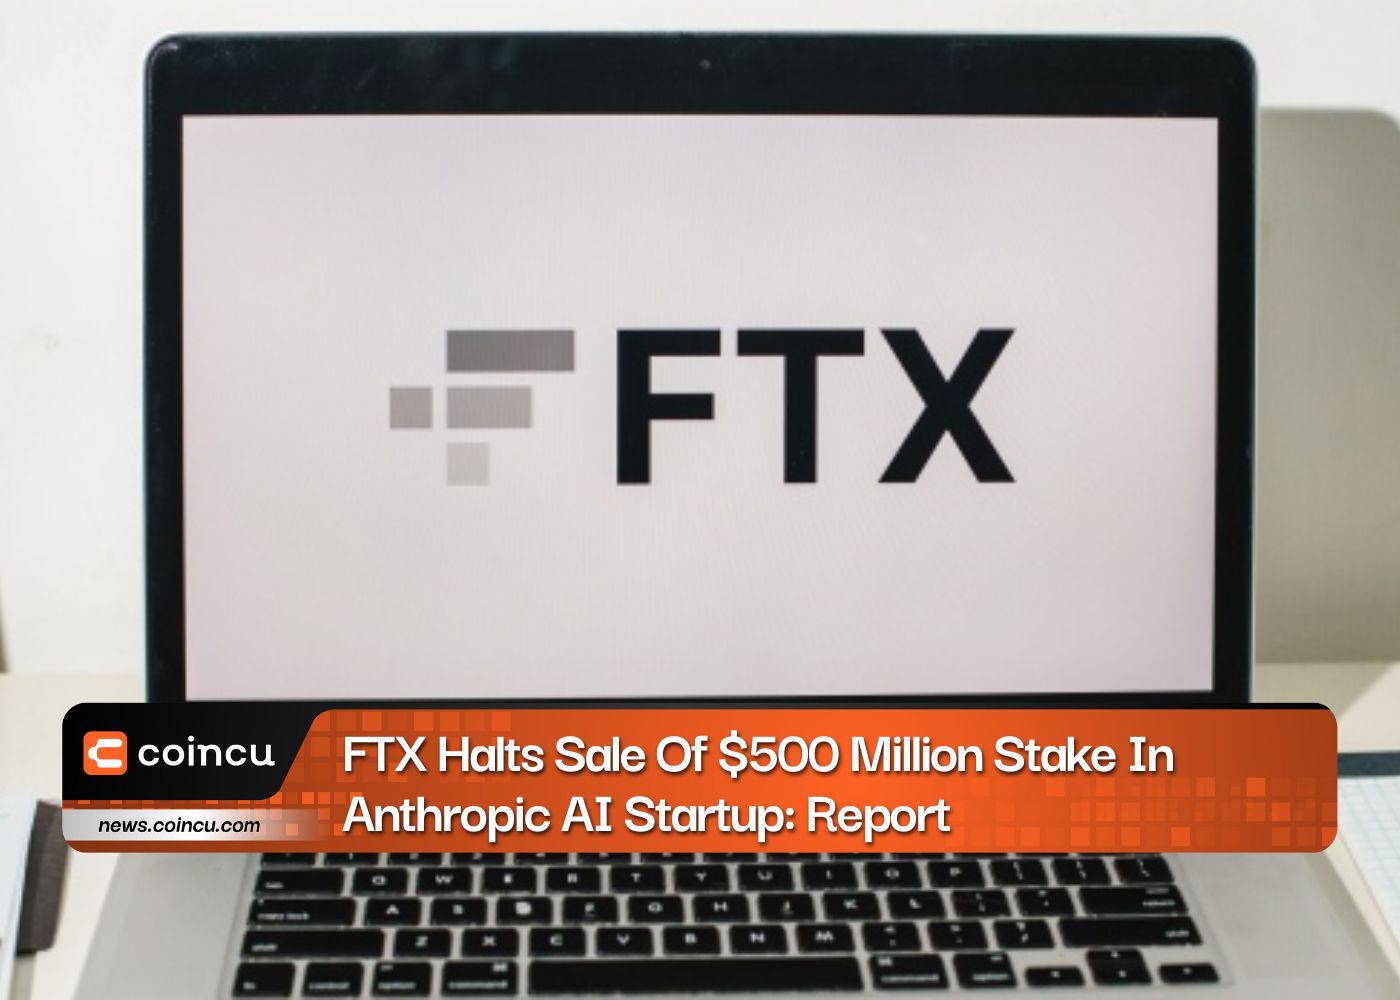 FTX Halts Sale Of $500 Million Stake In Anthropic AI Startup: Report